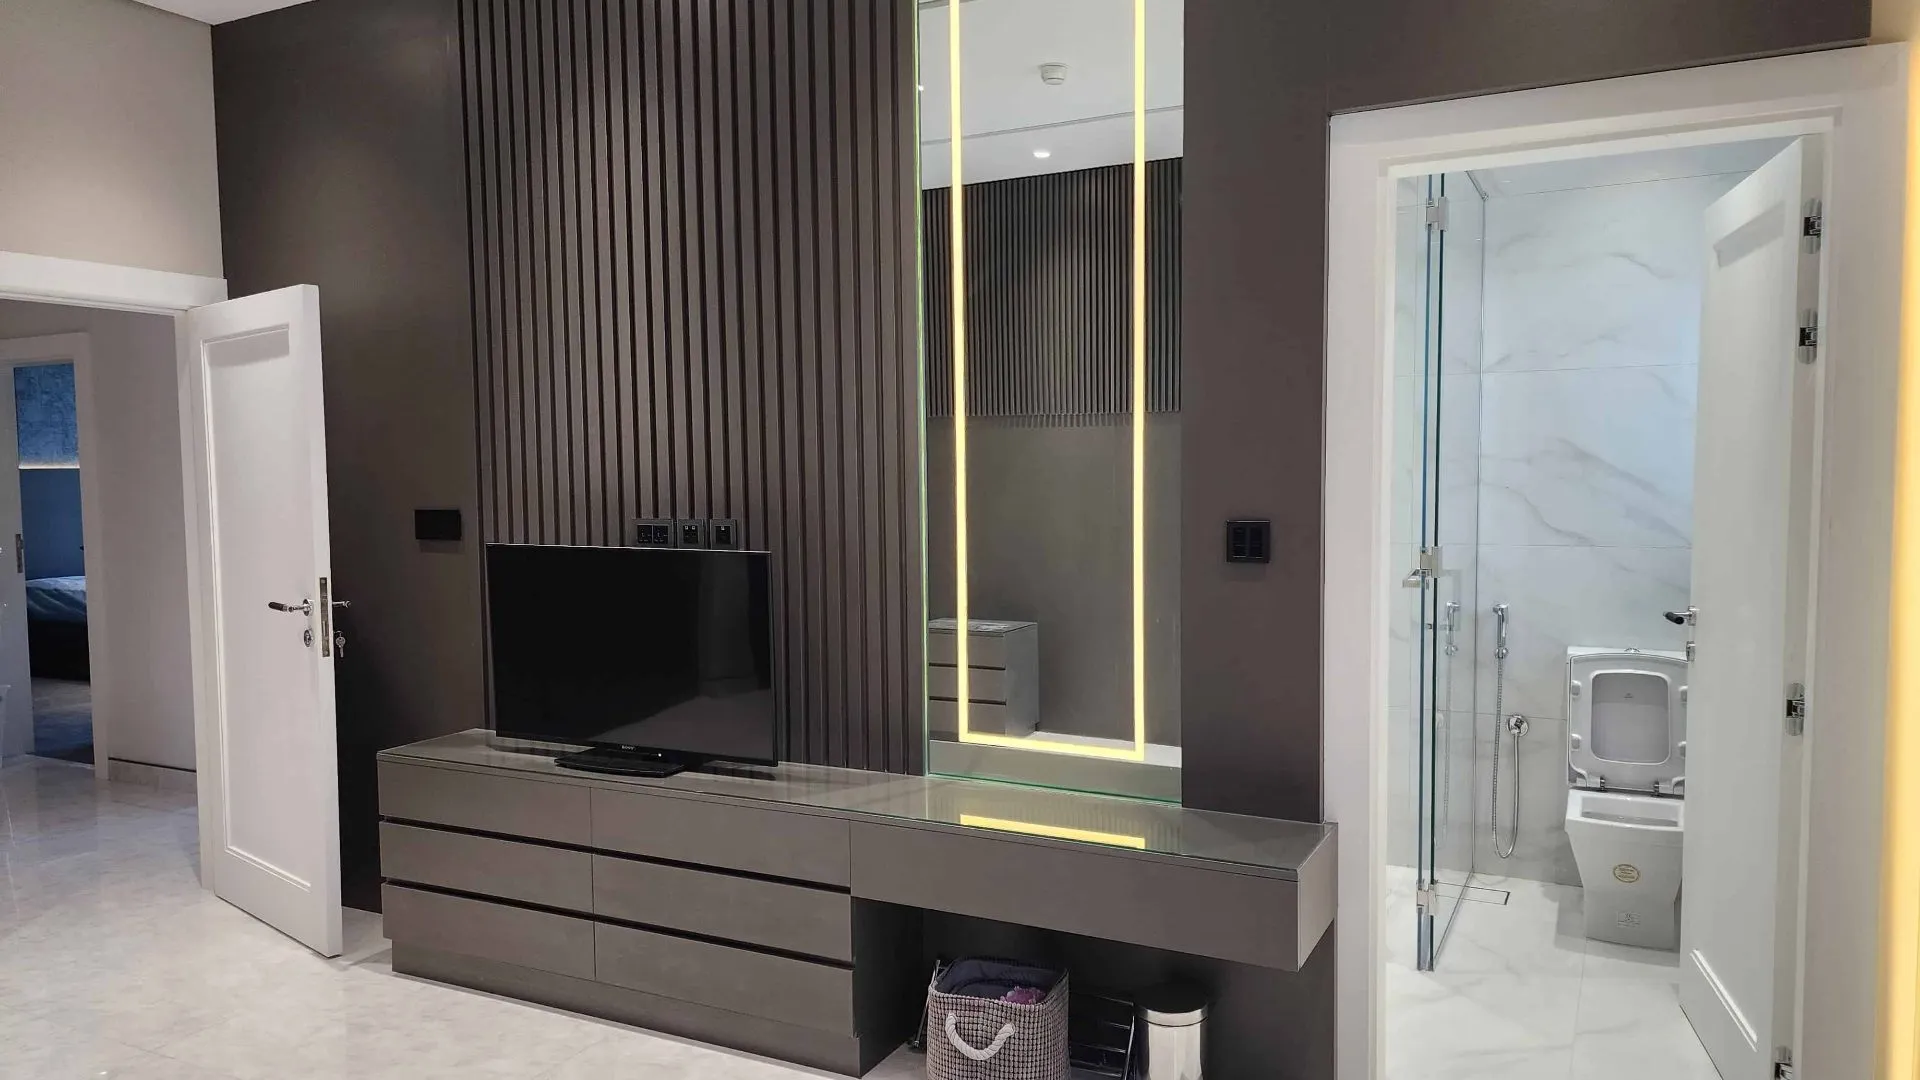 A modern bathroom with a TV and mirror, creating a luxurious and convenient space for relaxation and grooming.